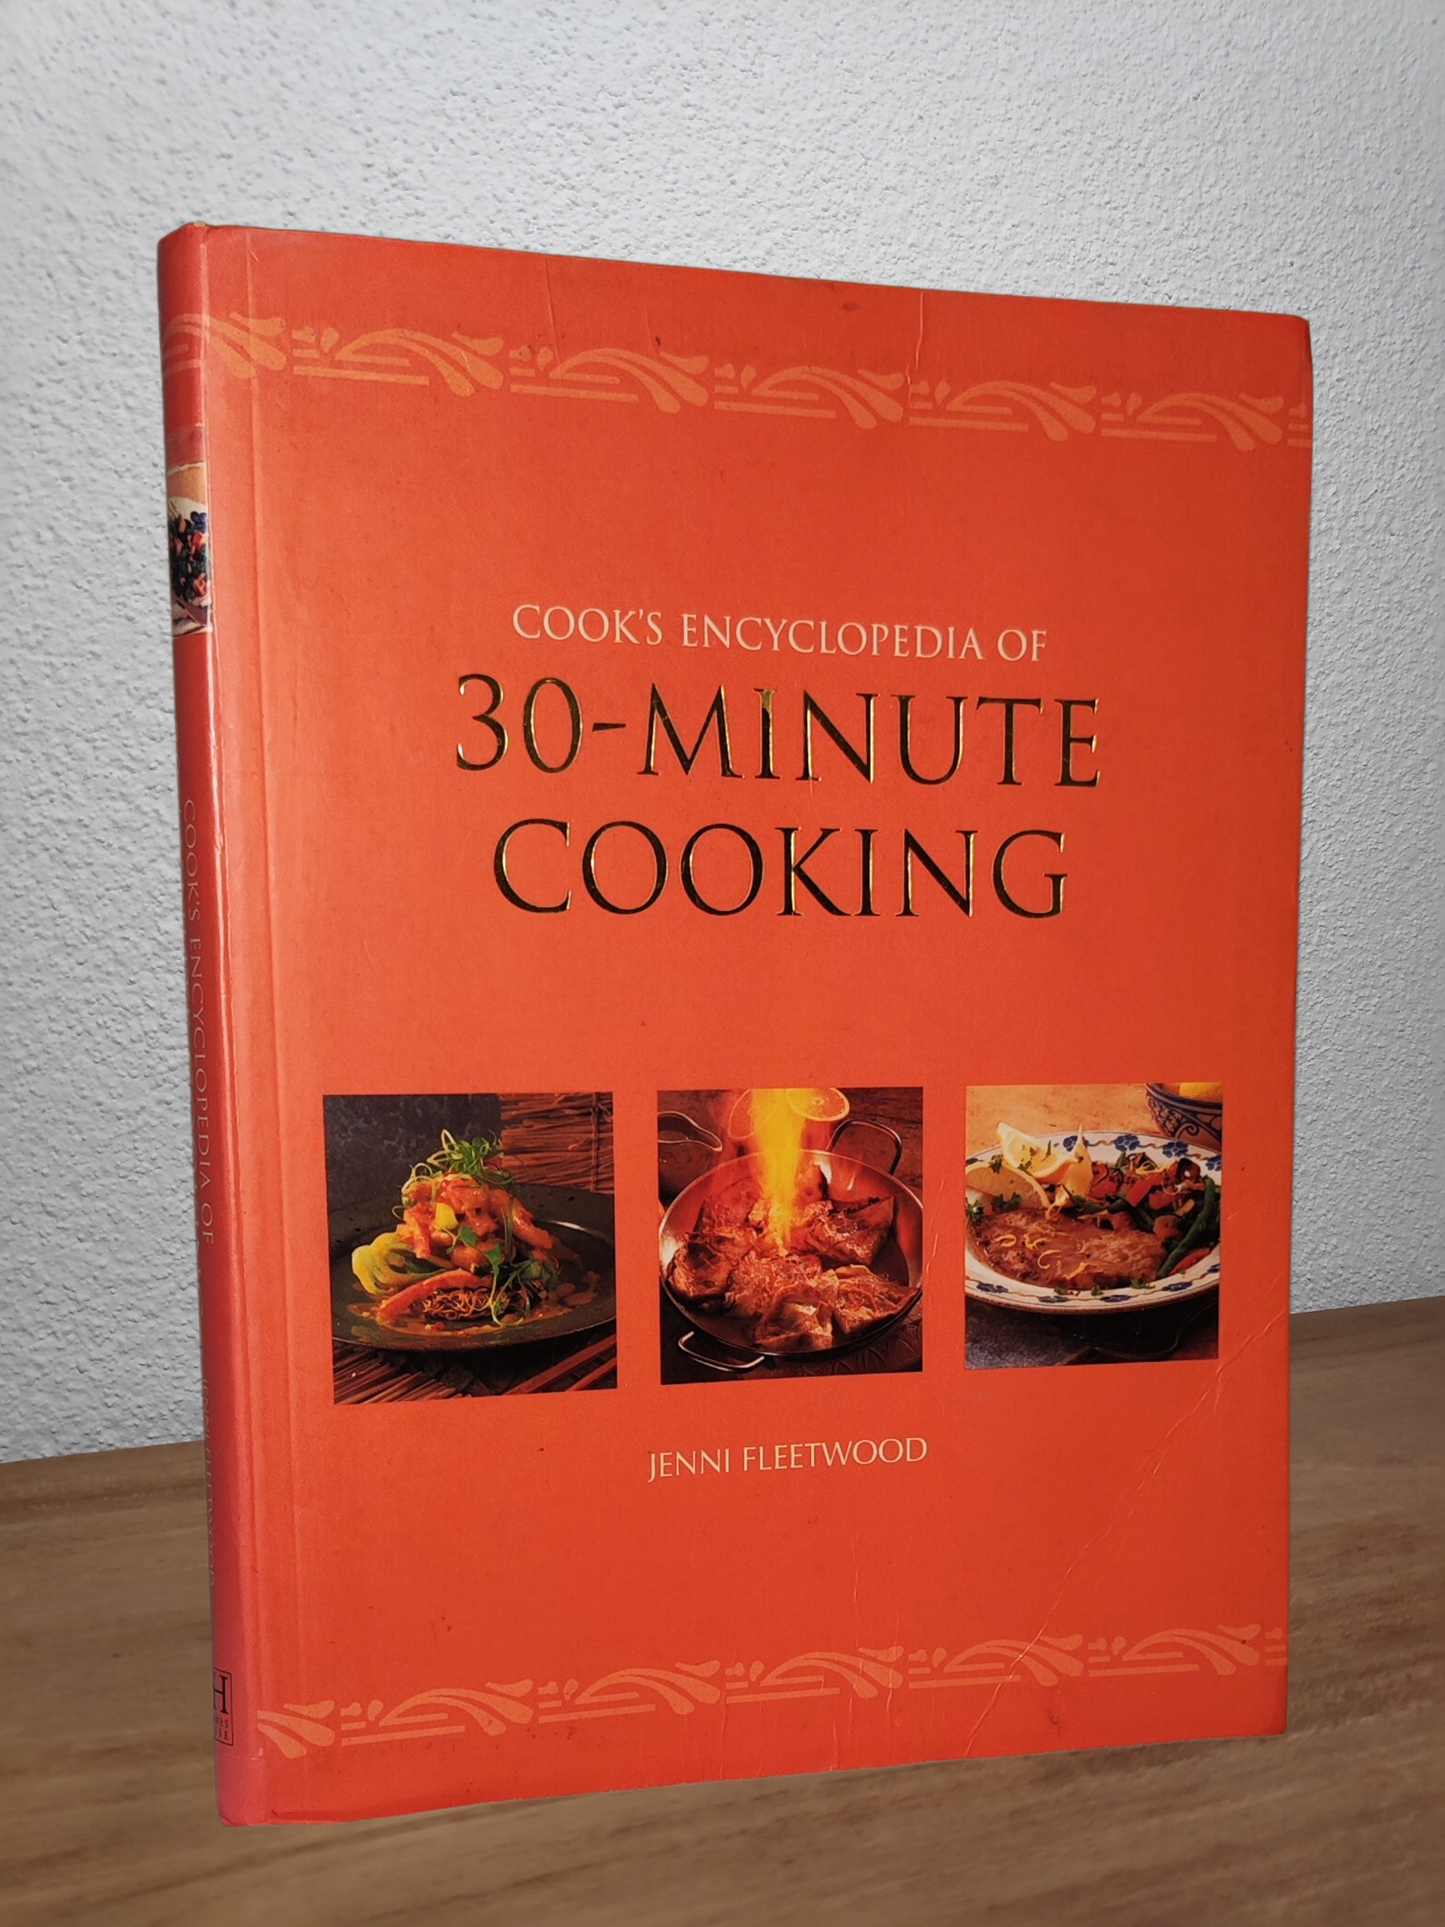 Jenni Fleetwood - Cook's Encyclopedia of 30-Minute Cooking  - Second-hand english book to deliver in Zurich & Switzerland